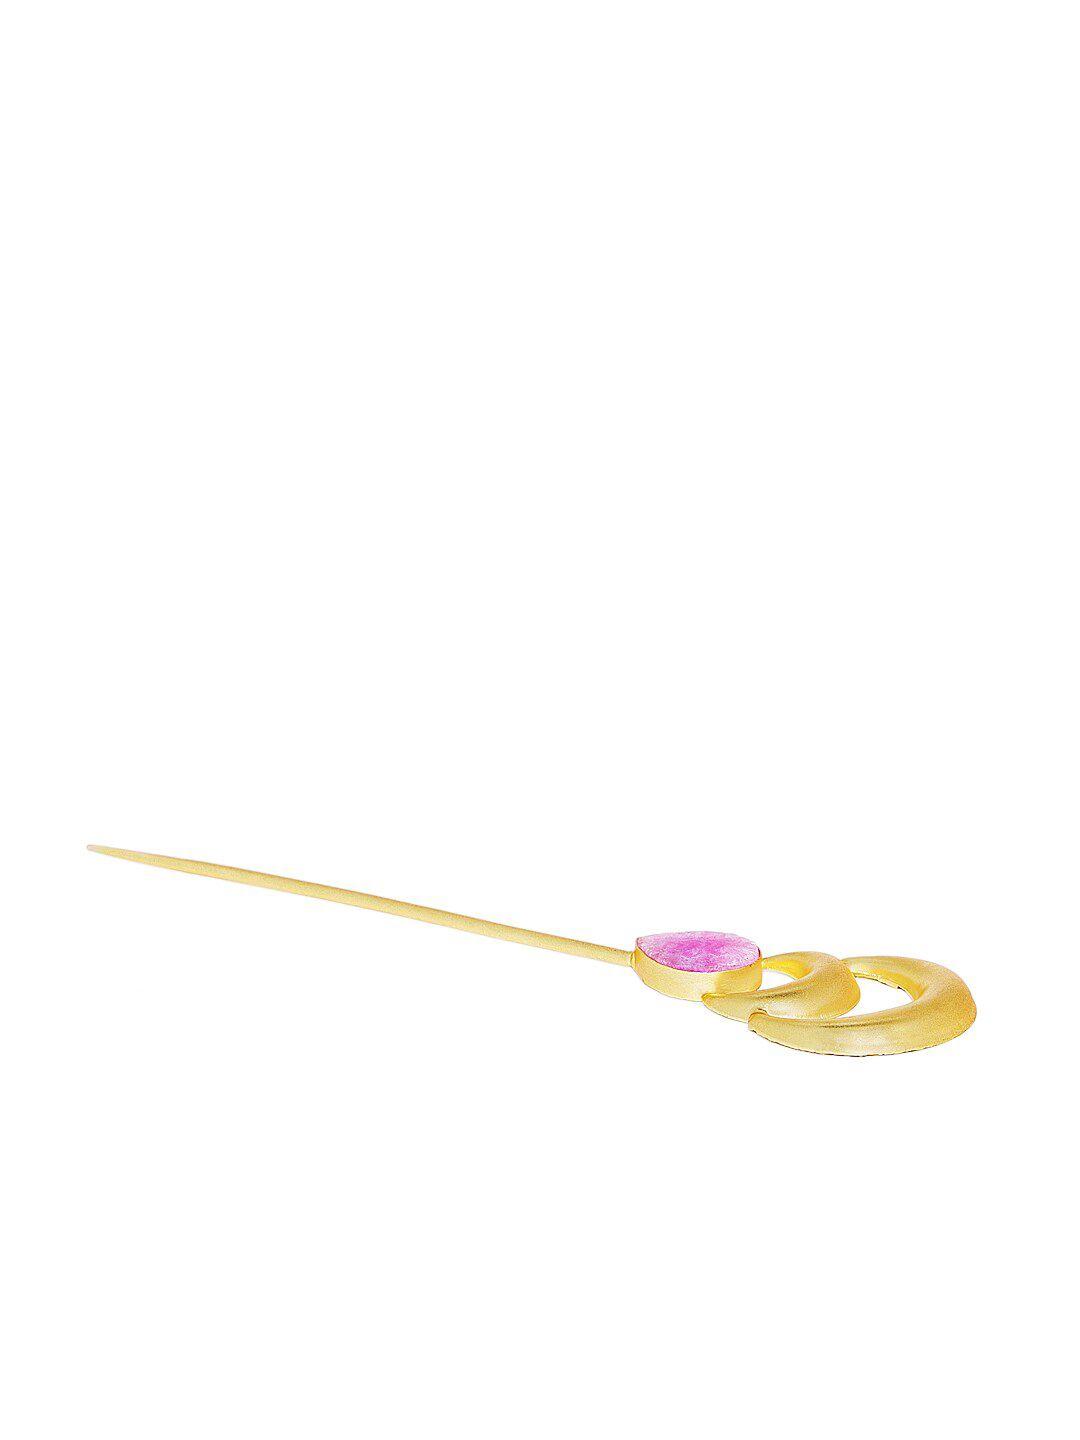 accessher women gold-toned & pink metal beaded hairstick